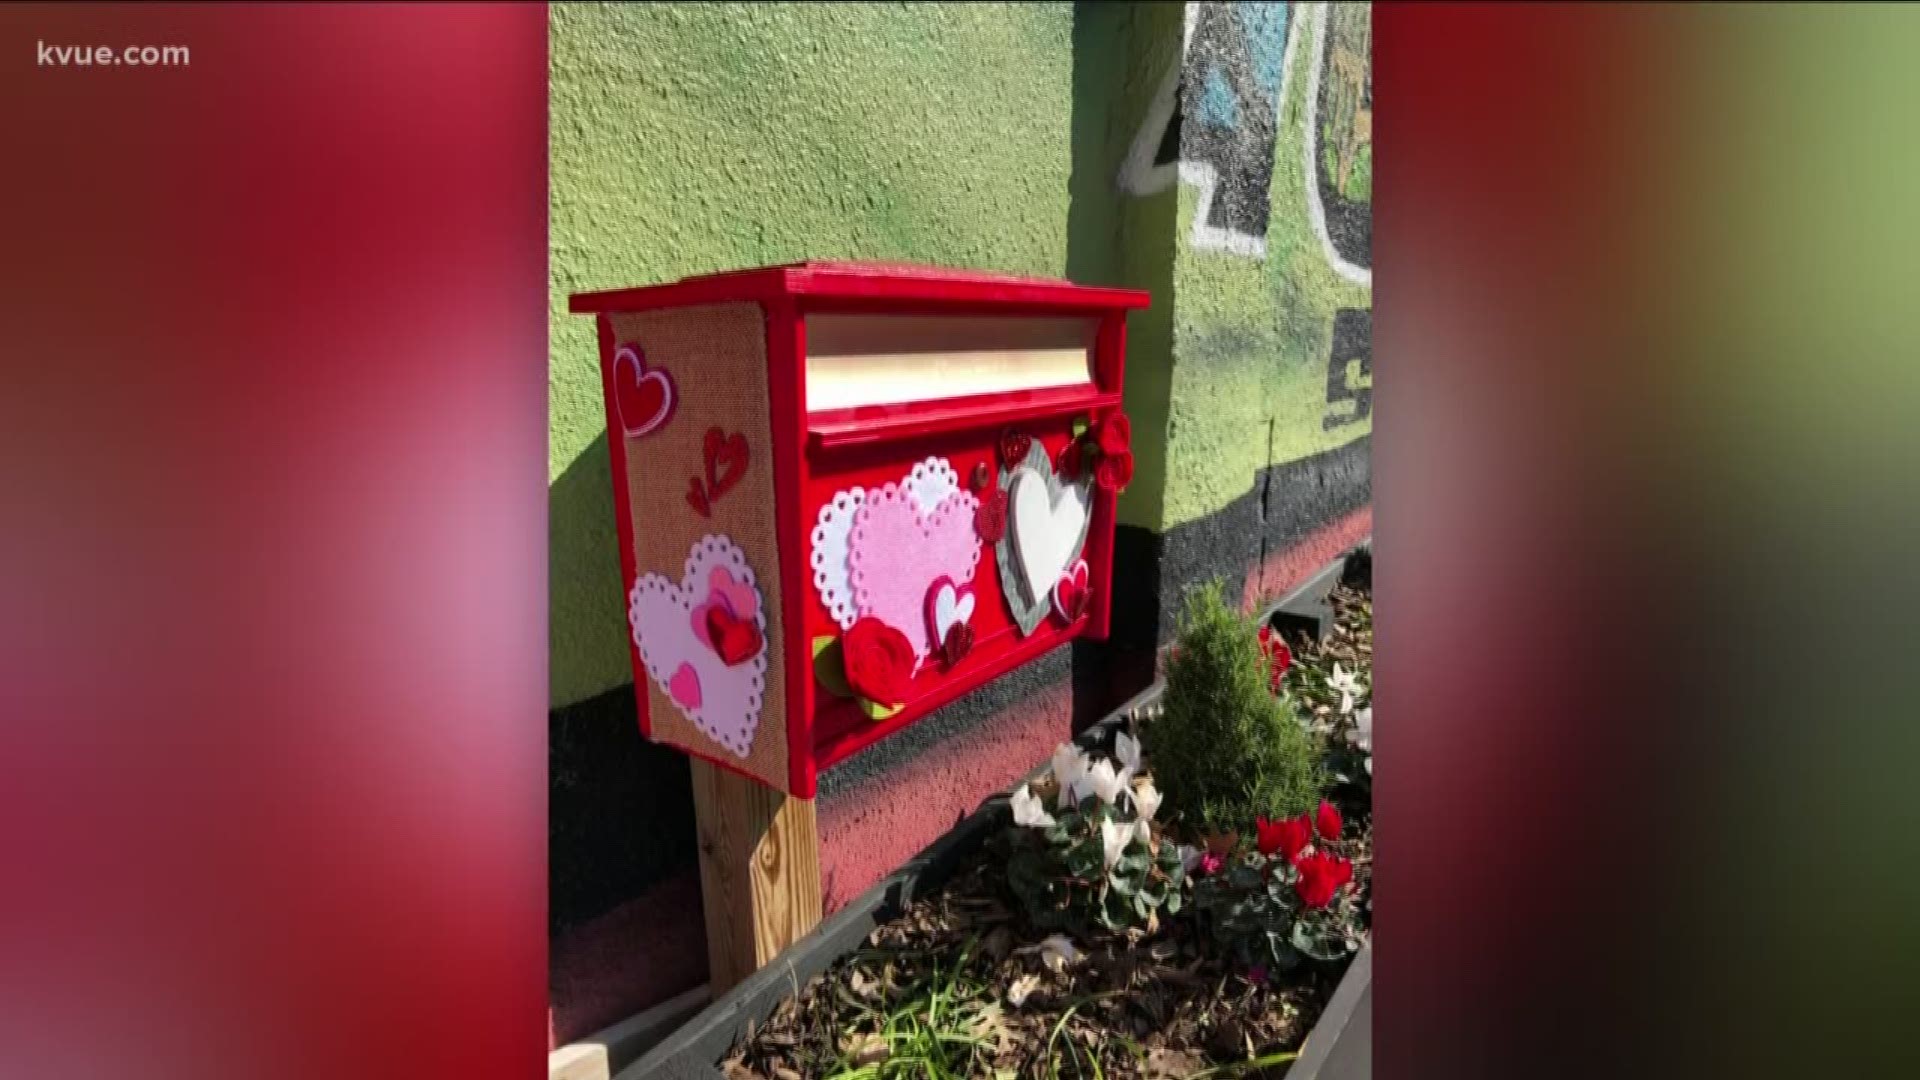 If you're looking to impress with your Valentine's Day cards this year, Downtown San Marcos may be the place to be.